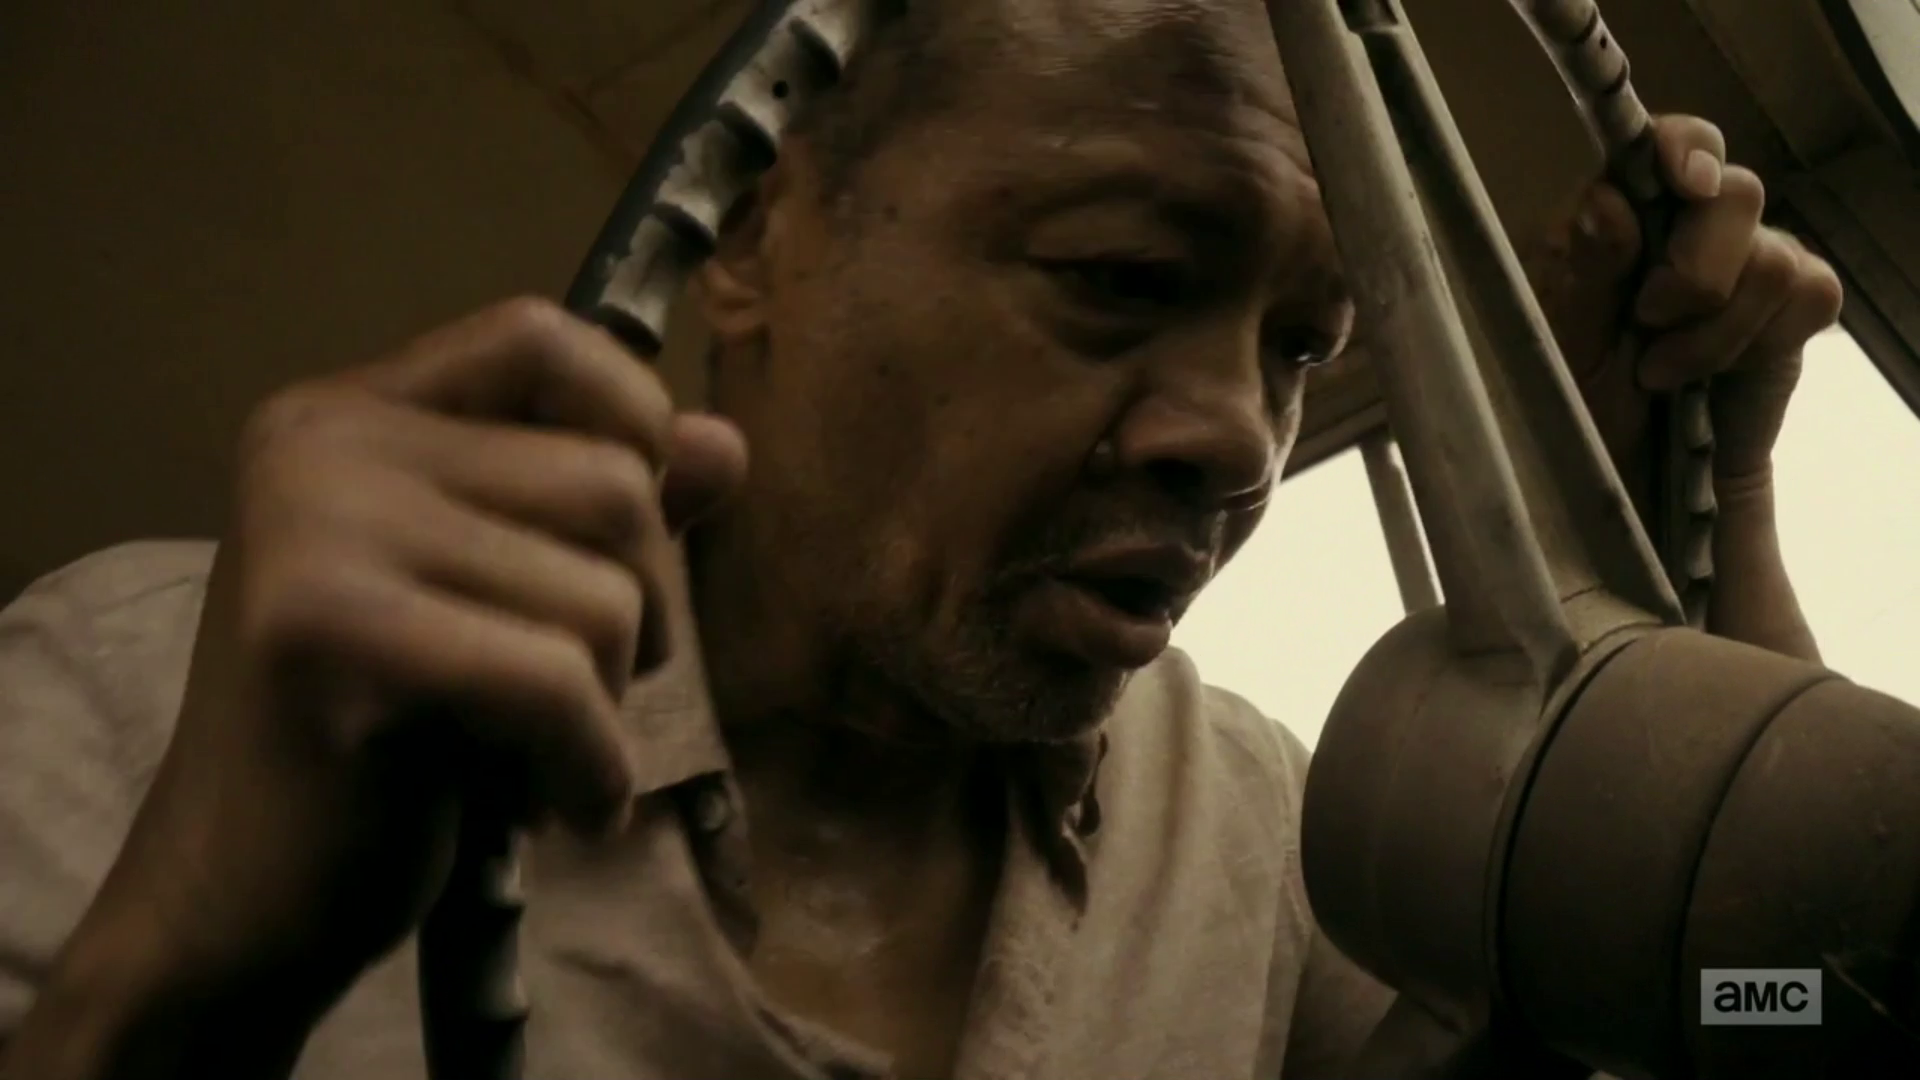 vlcsnap 2016 10 05 18h28m48s23 - Fear The Walking Dead Recap: "Wrath" and "North"